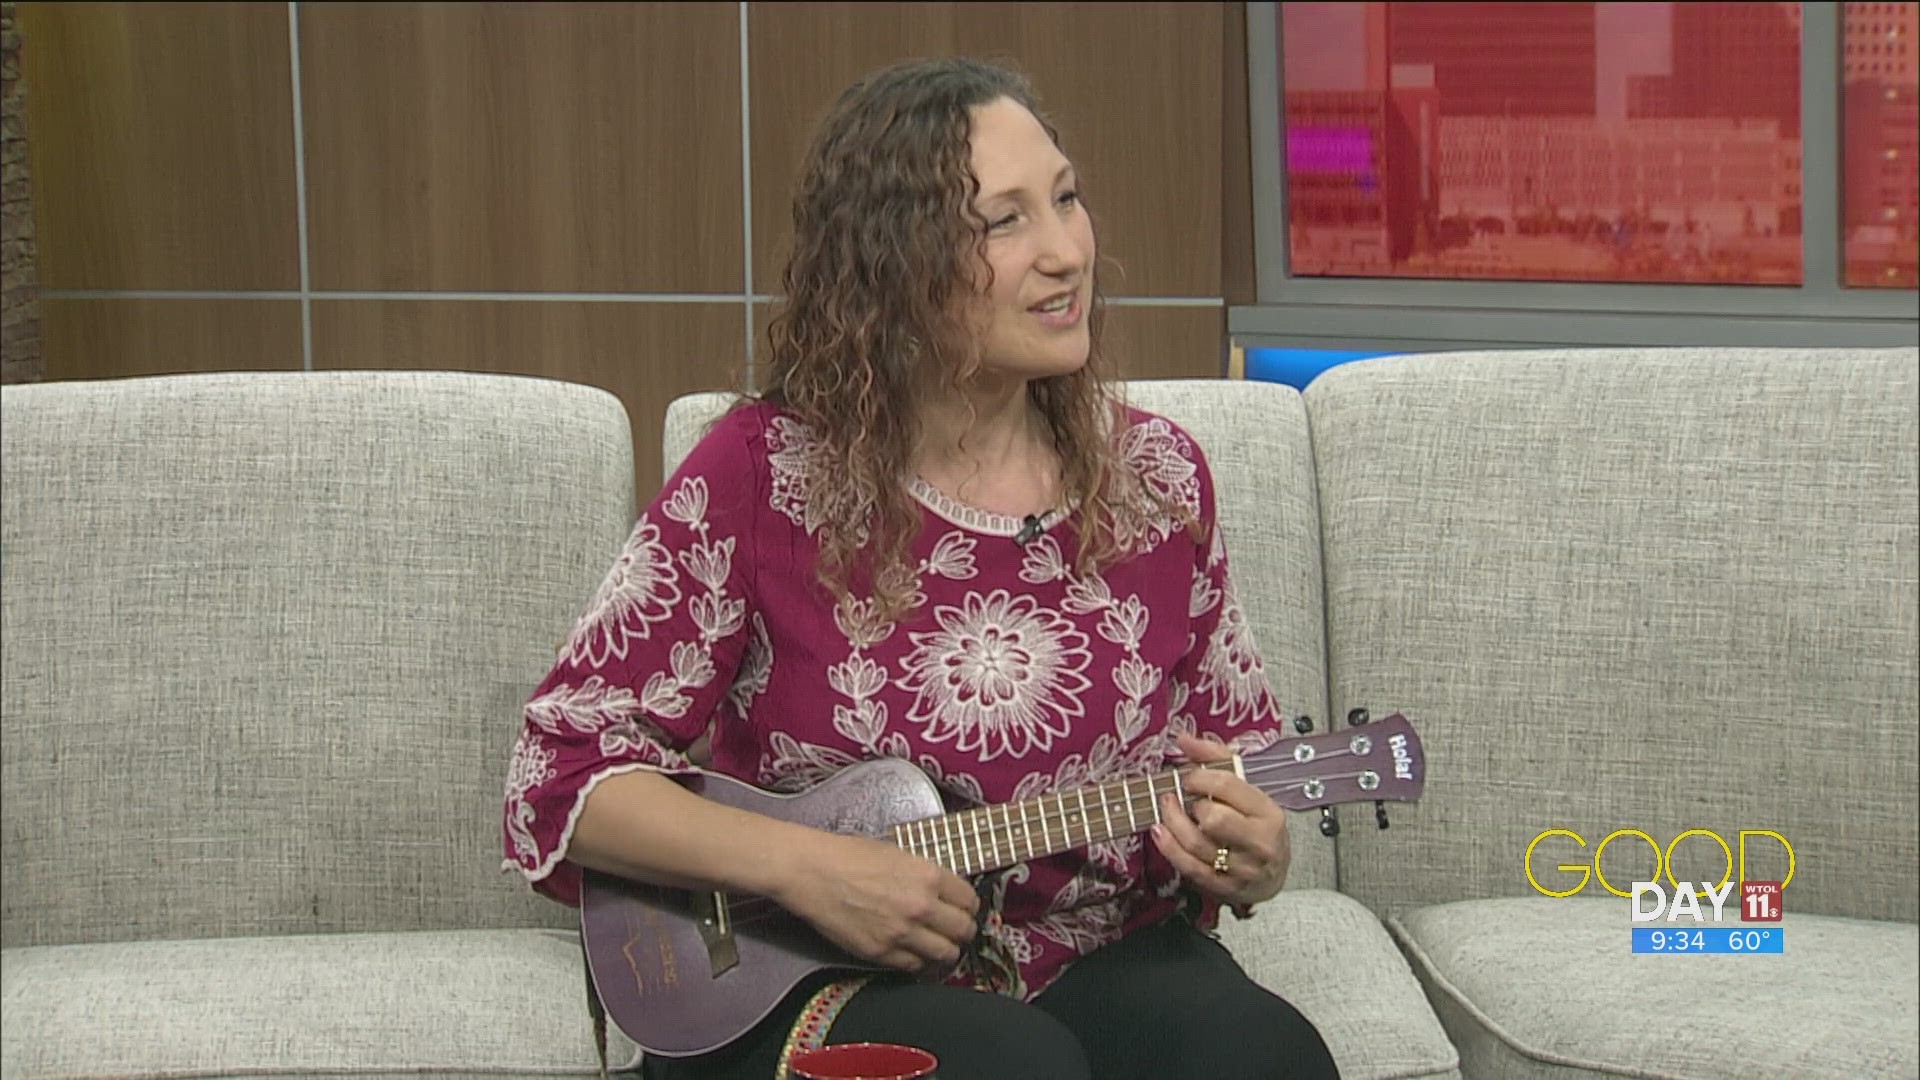 Risa Beth Cohen talks how she uses music to encourage literacy among children.